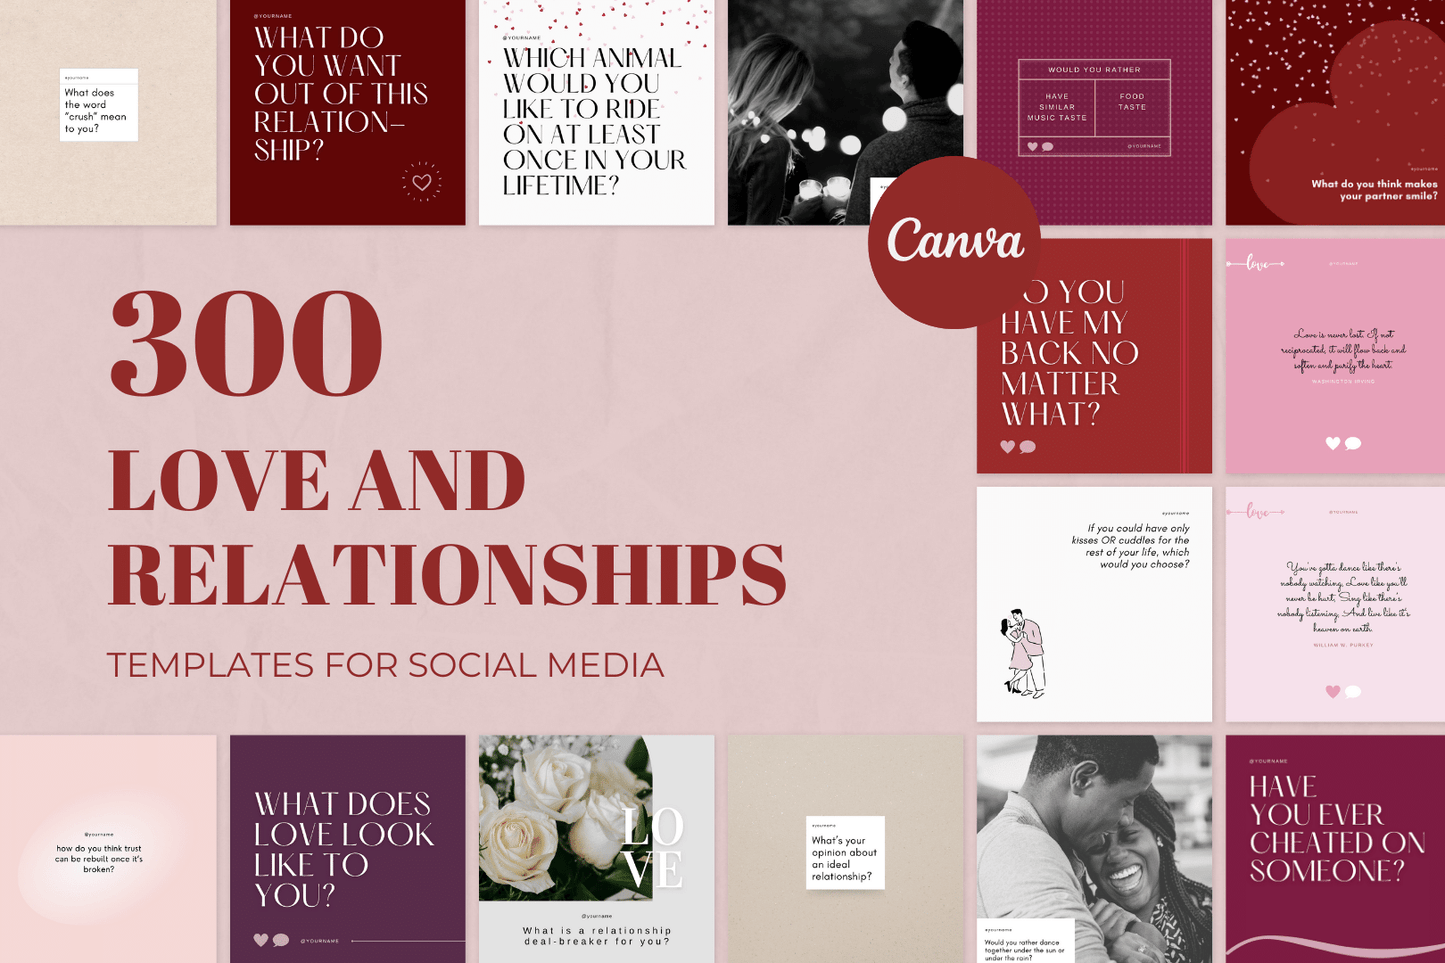 300 Love And Relationships Templates for Social Media